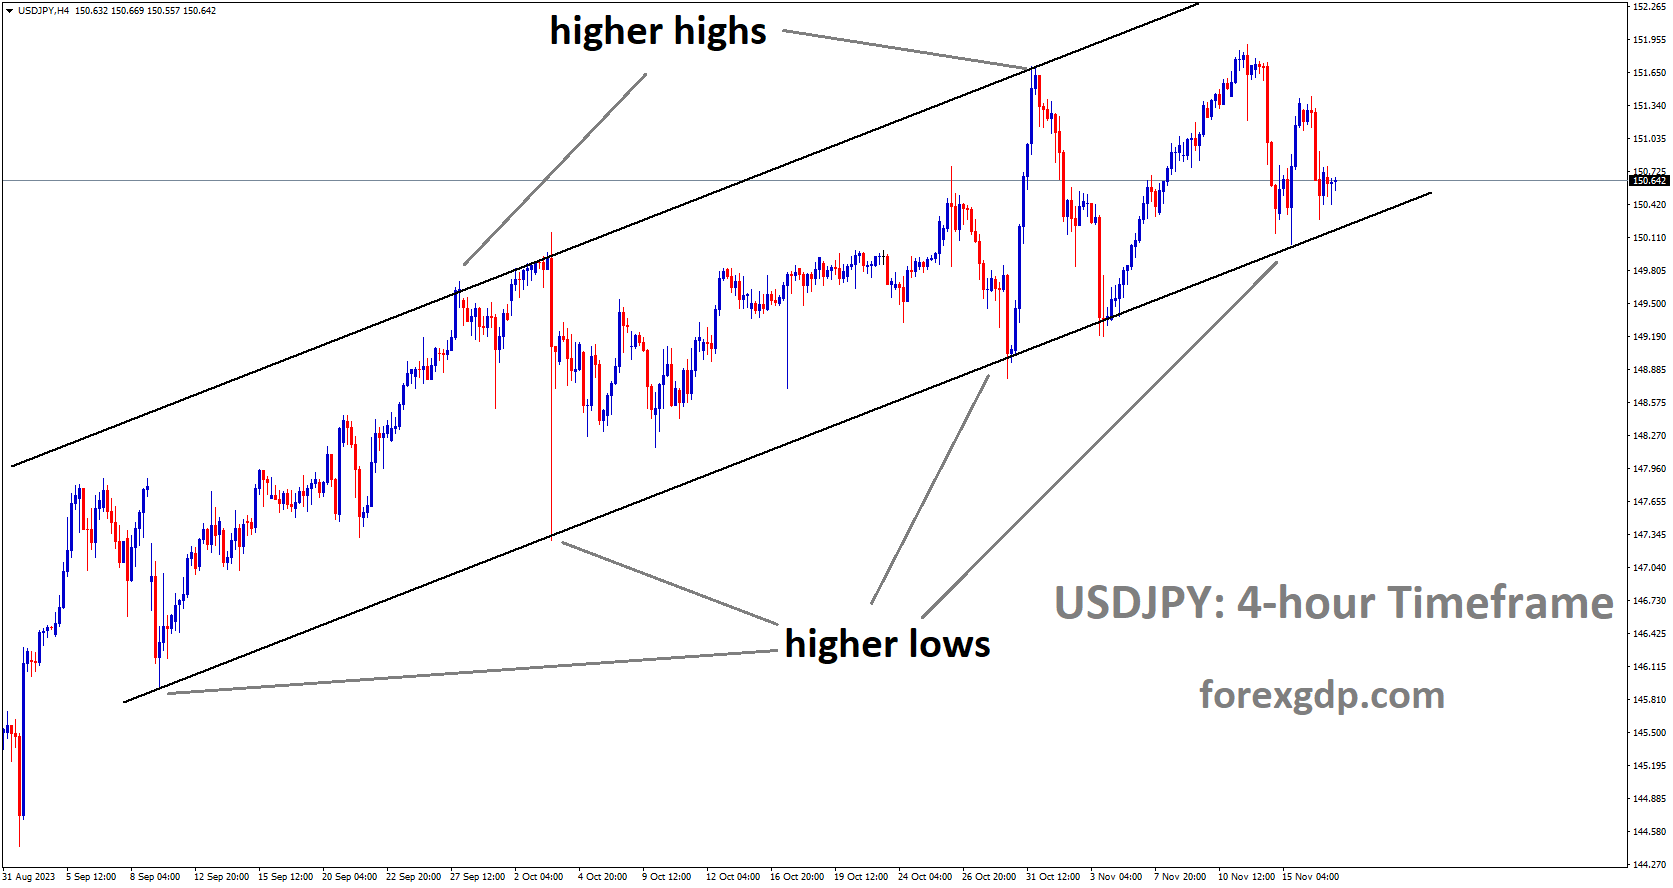 USDJPY is moving in a ascending channel and the market has reached the higher low area of the channel